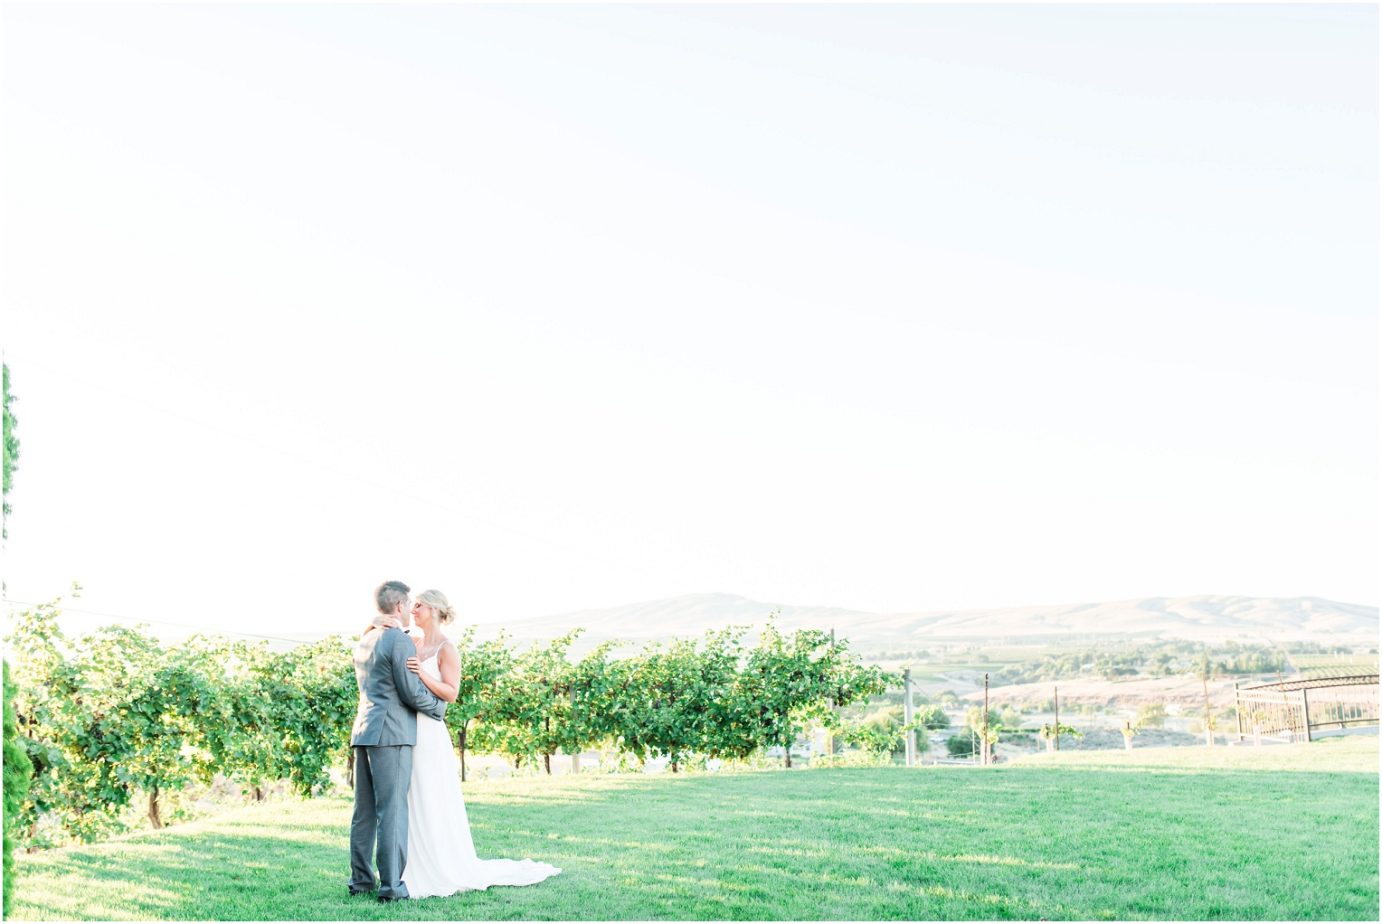 Chandler Reach Wedding Moscow Mule Inspiration Shoot Bride and groom in vineyard